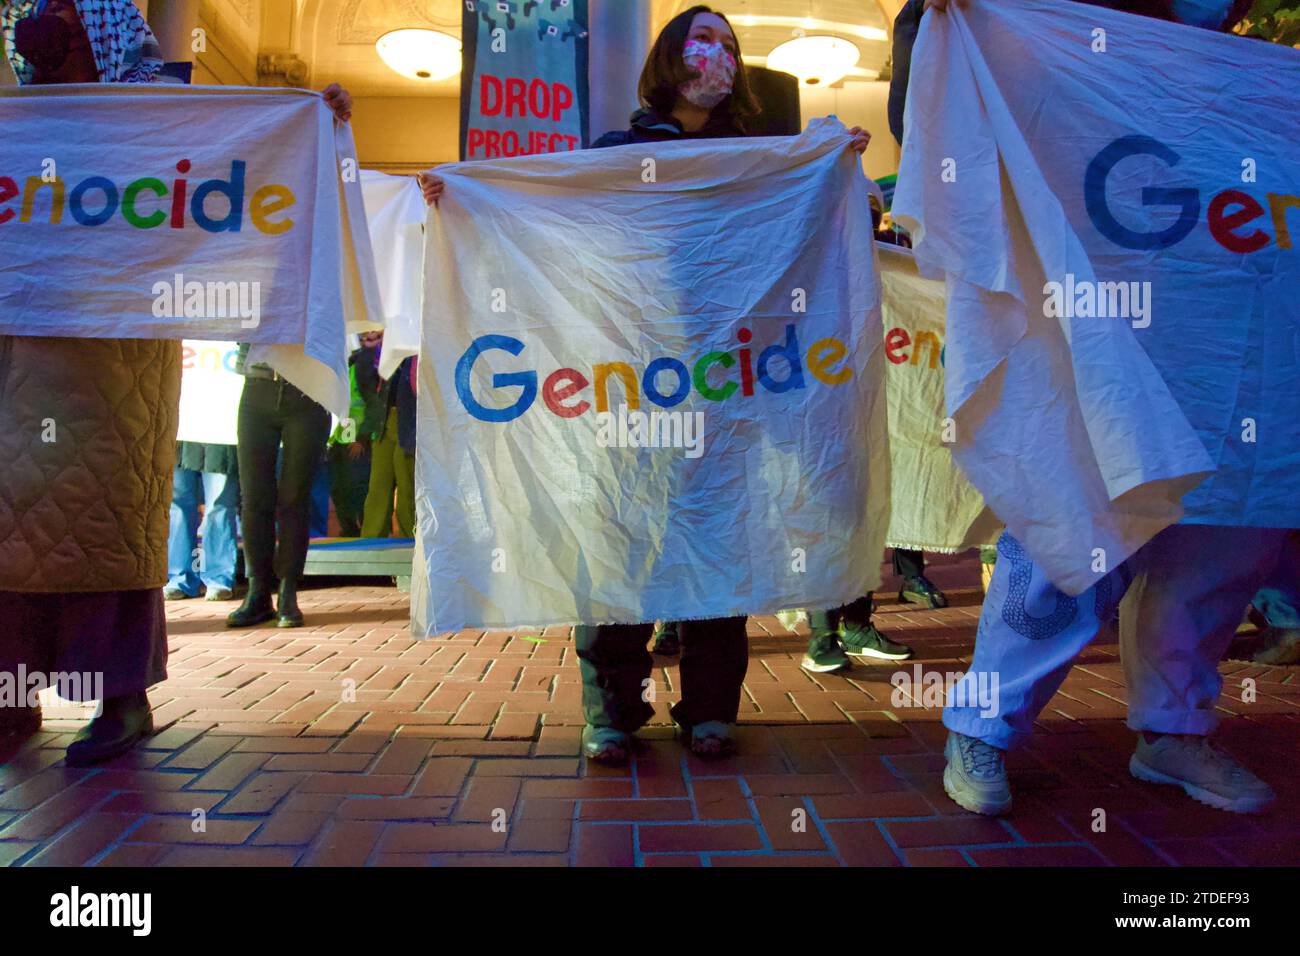 Shut Down Google: No Tech For Genocide, protesting Project Nimbus contract with Israel and artificial intelligence for warfare. San Francisco, CA, USA Stock Photo